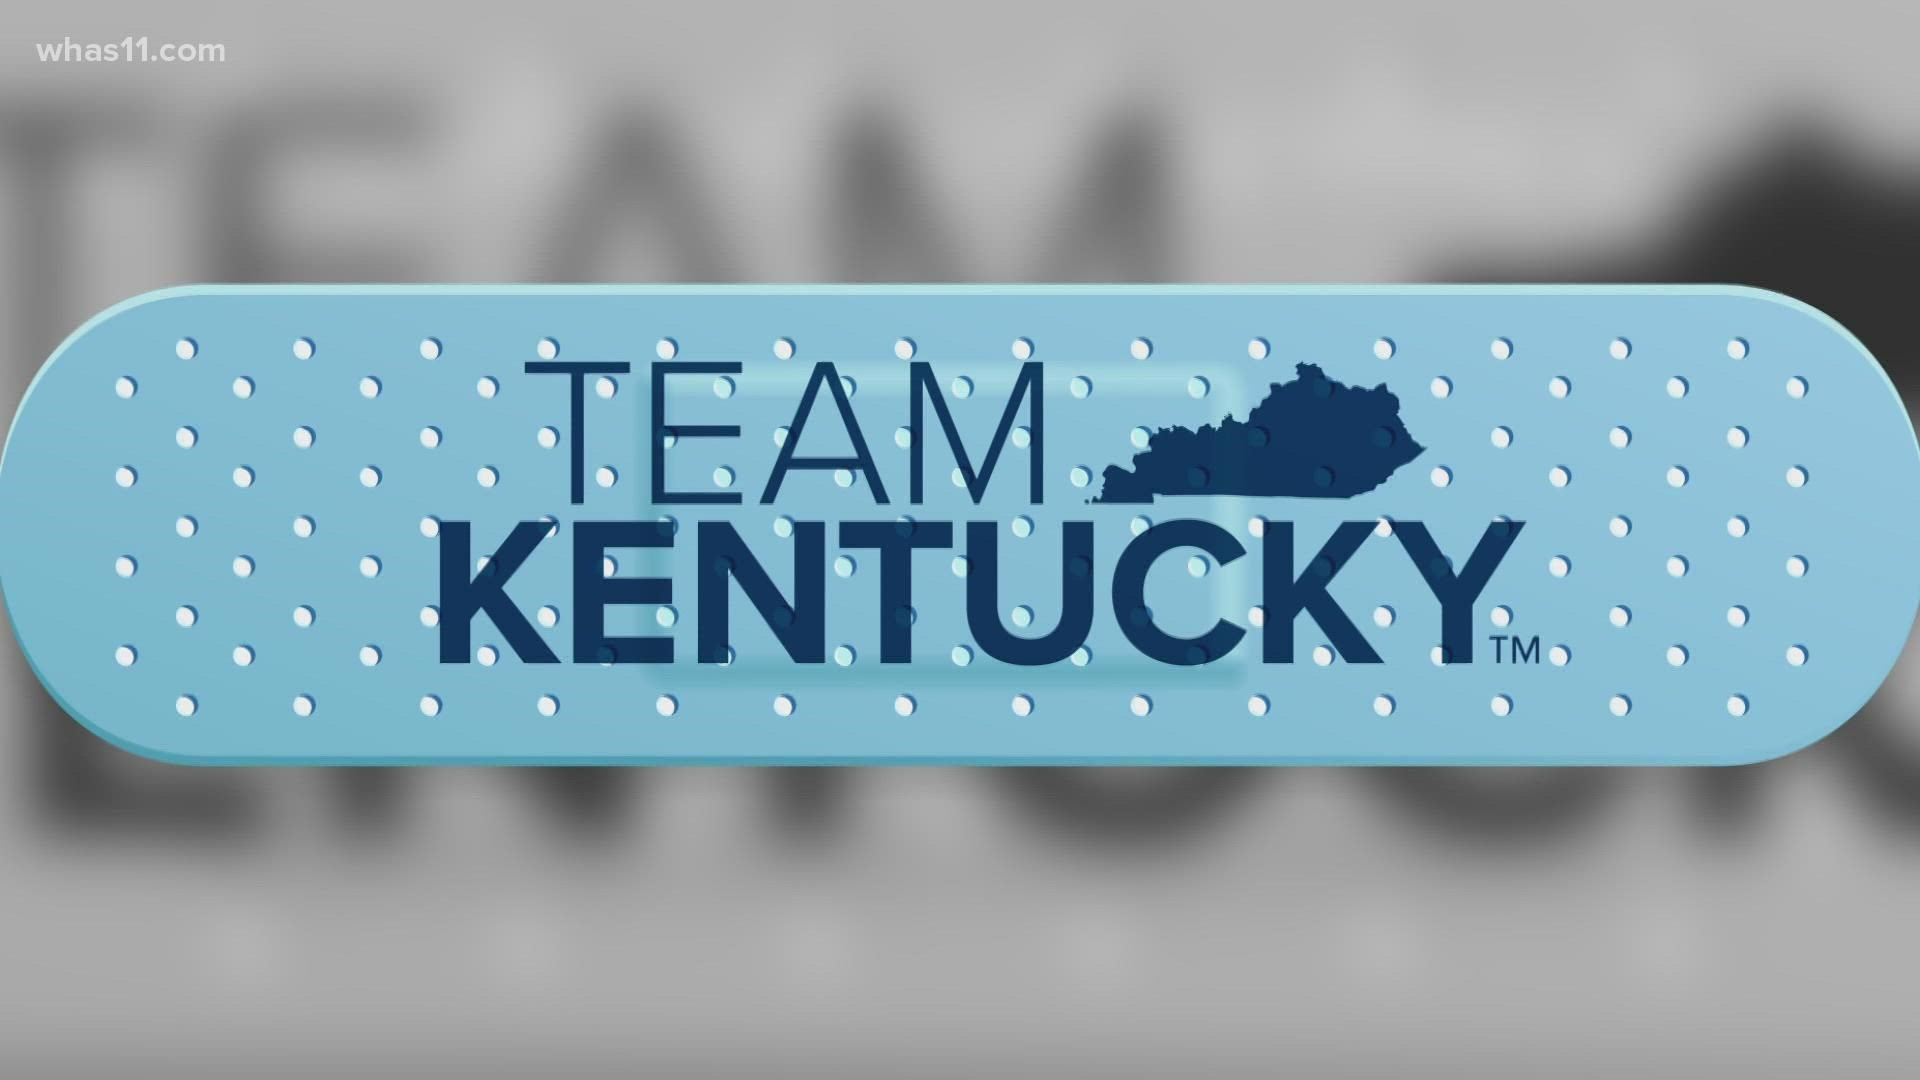 The university is filing a notice of opposition with the US Patent and Trademark office to stop the state from trademarking "Team Kentucky."